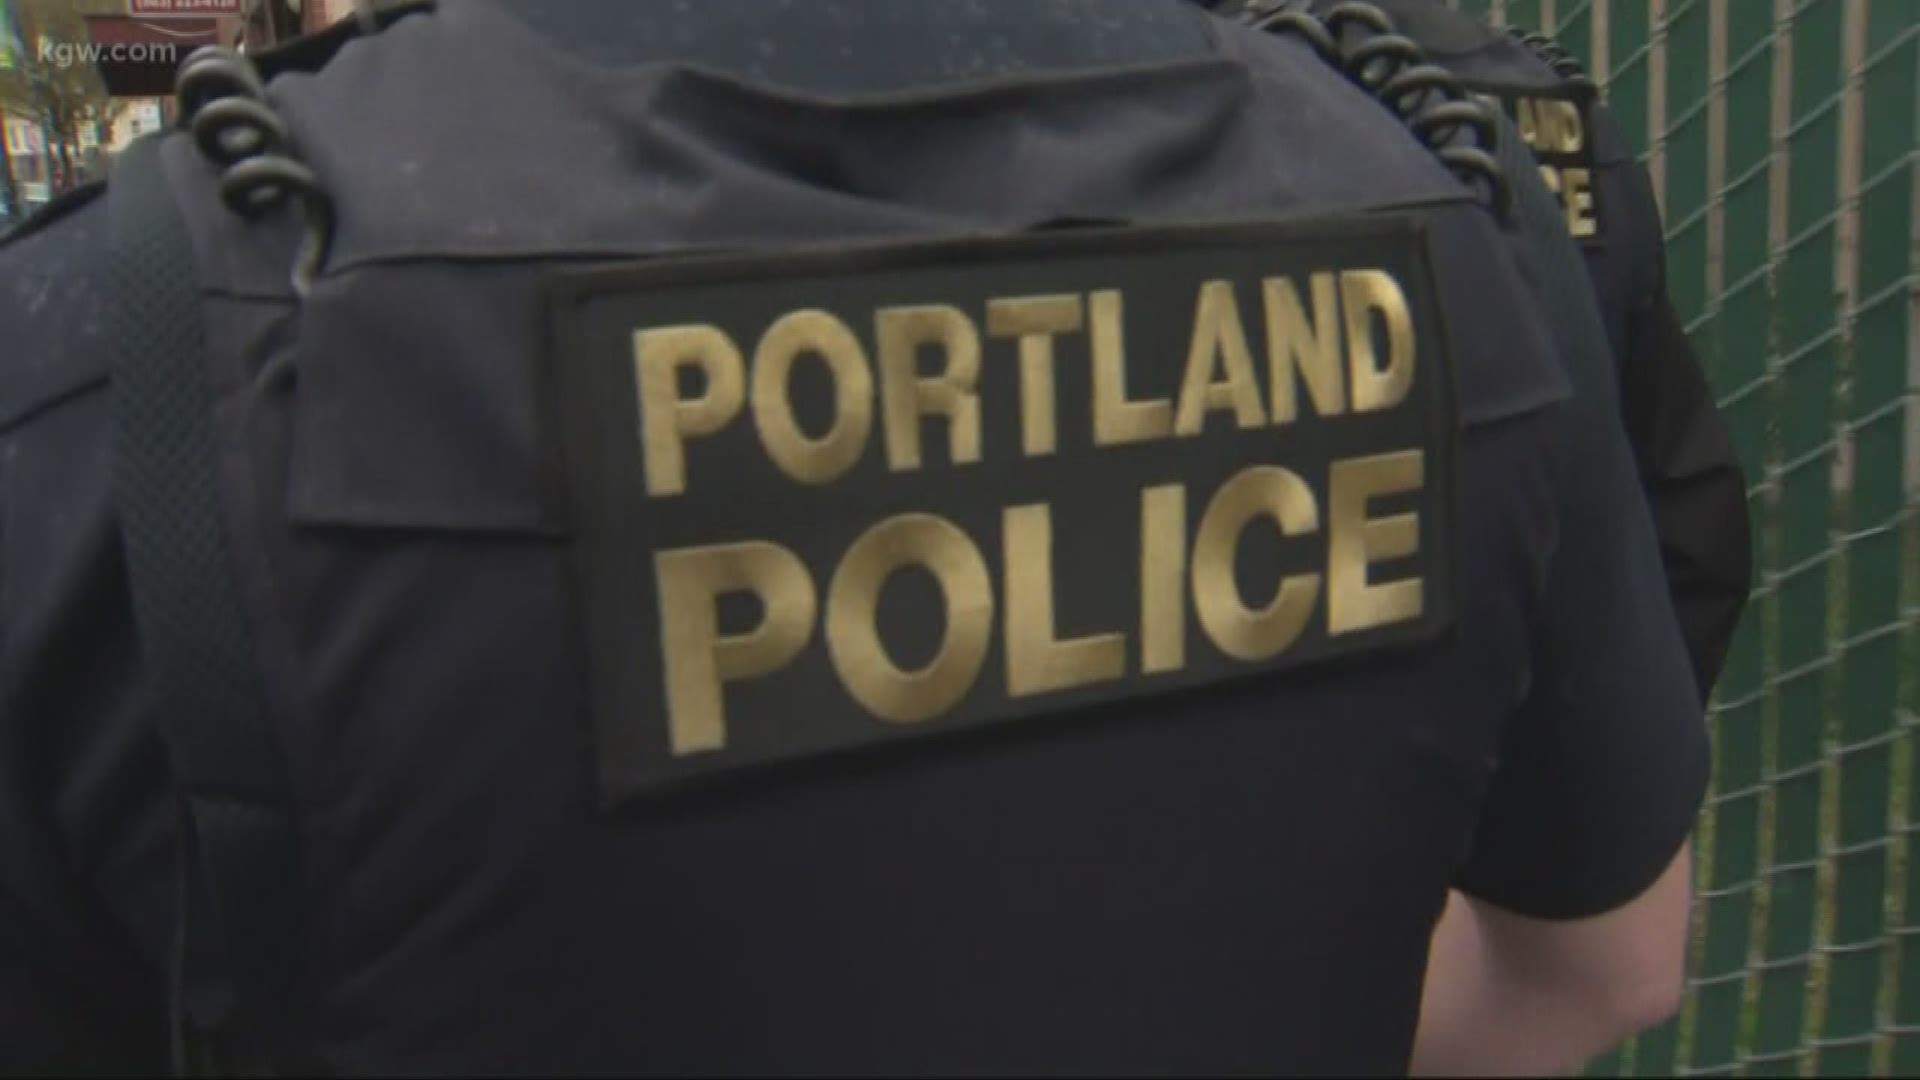 The Portland Public School Board voted unanimously Tuesday night to suspend the district's agreement to use more than a million dollars in district funds to pay for school resource officers to spend more time in schools.